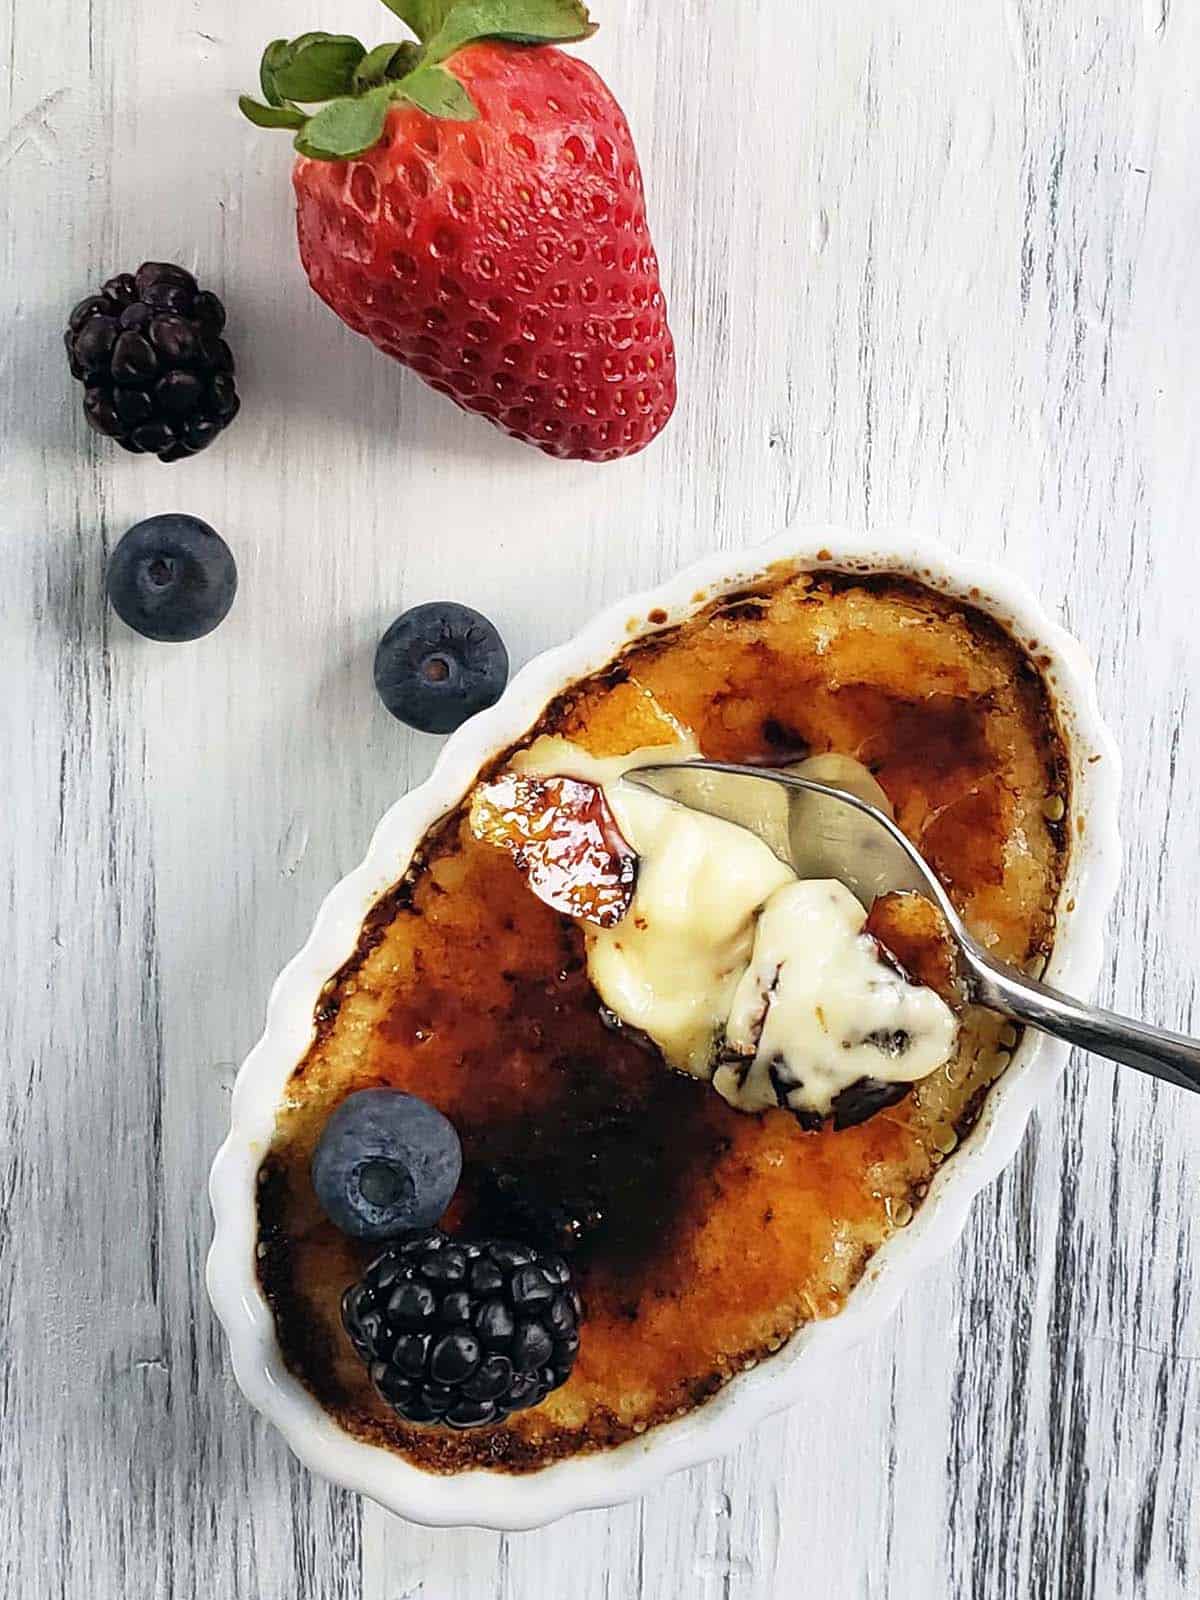 Vanilla creme brulee topped with berries with bite missing.